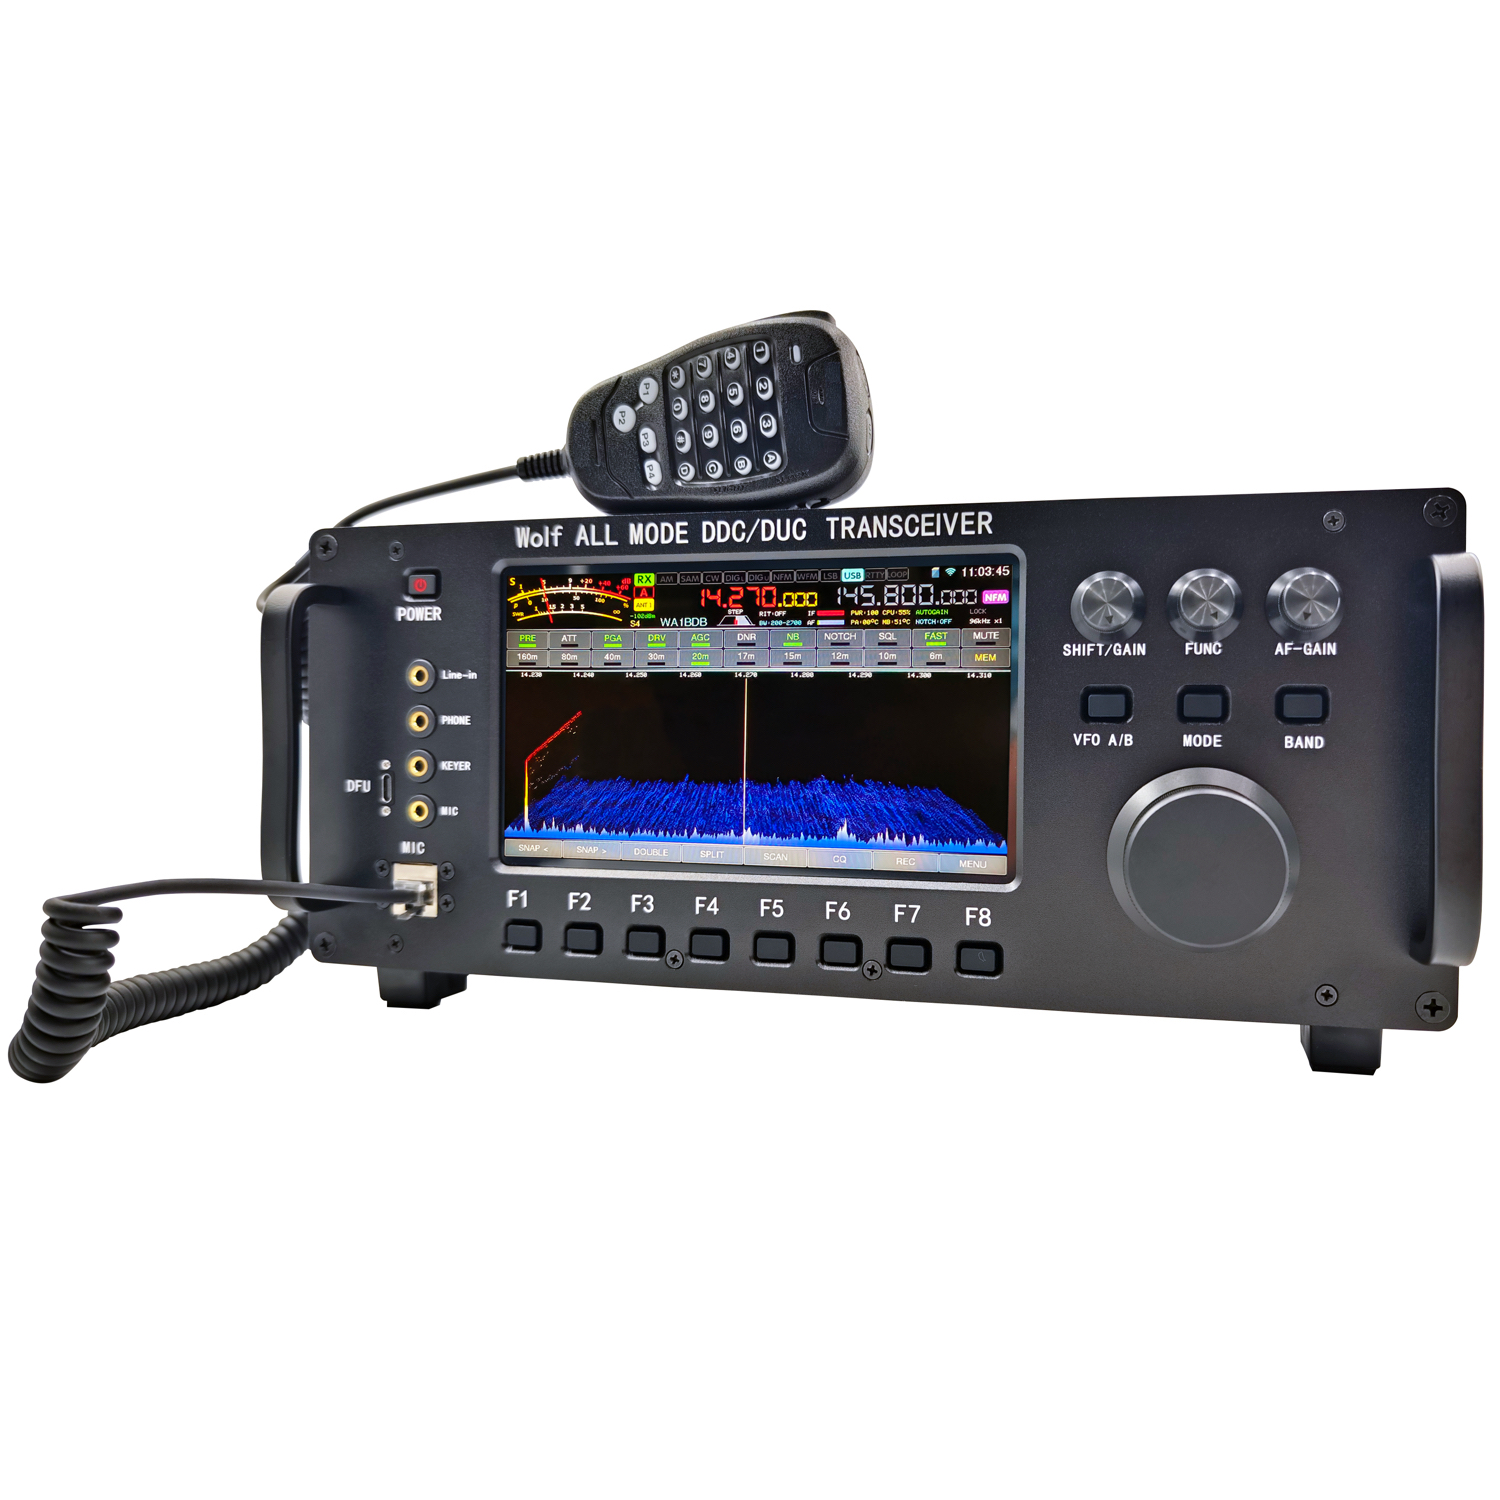 20W 0-750MHz Wolf All Mode DDC/DUC Transceiver Mobile Radio LF/HF/6M/VHF/UHF Transceiver for UA3REO with WIFI